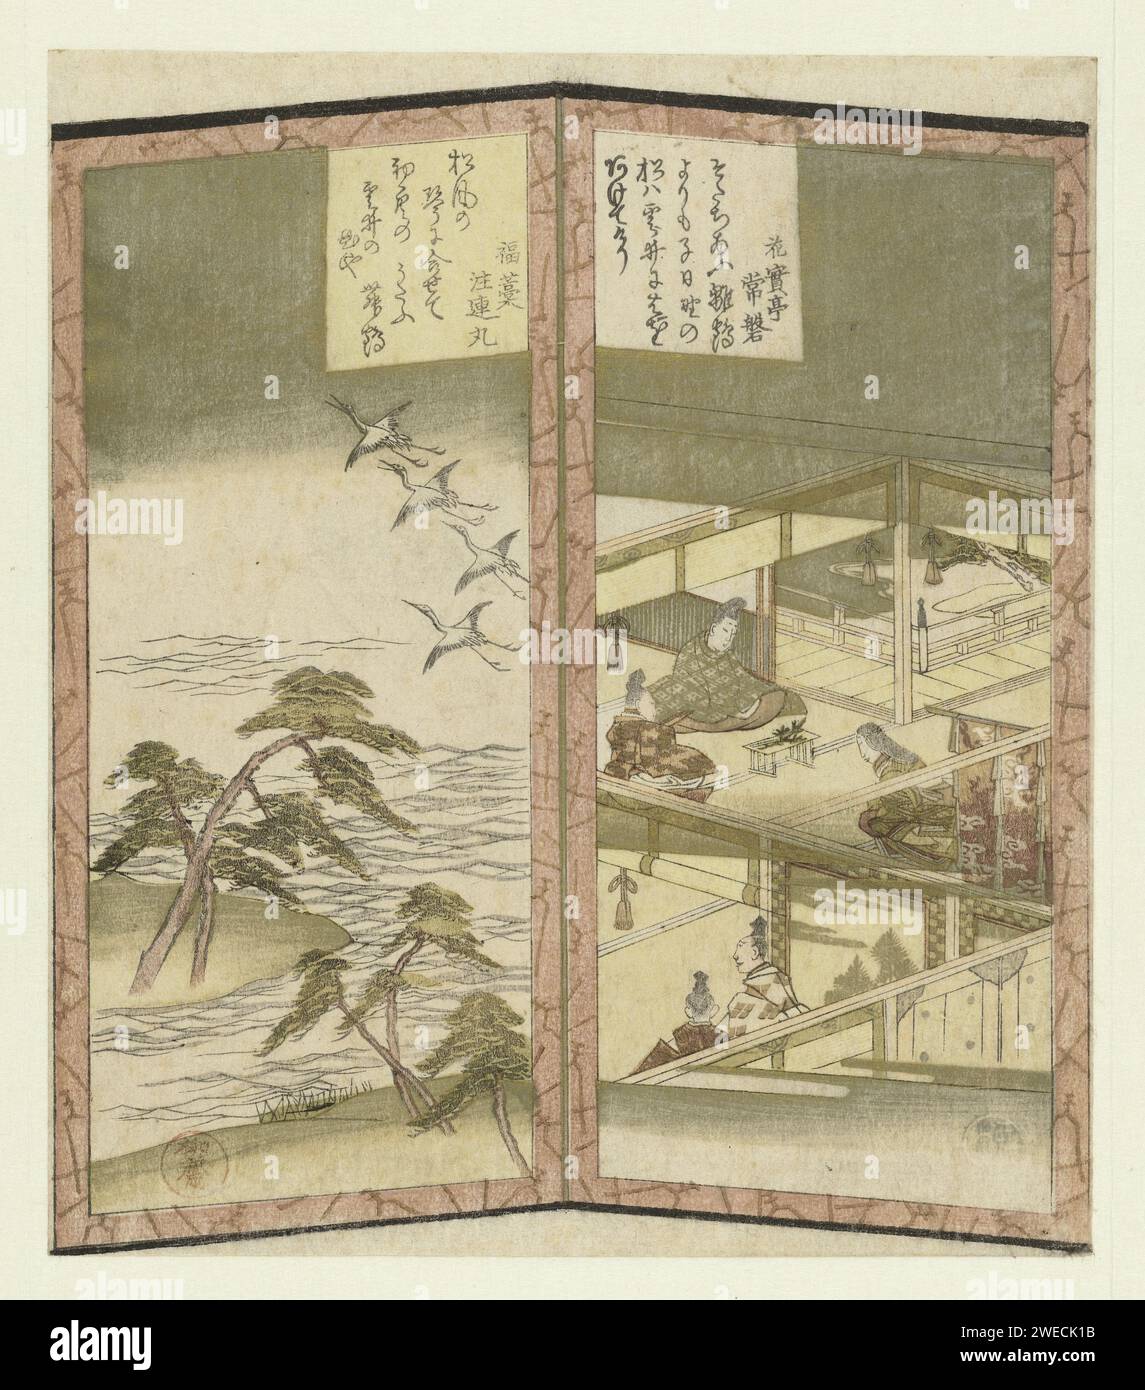 Palace Interior and Beach, Ryûryûkyo Shinsai, c. 1825  Two parts of a miniature folding screen. View of a palace with courtiers and on the left a beach with pine trees and flying cranes. The courtiers in the palace are around a young pine; This was an old tradition on the first day of the new year and was originally a fruit bar ritual. With two poems. Japan paper color woodcut screen, folding screen Stock Photo